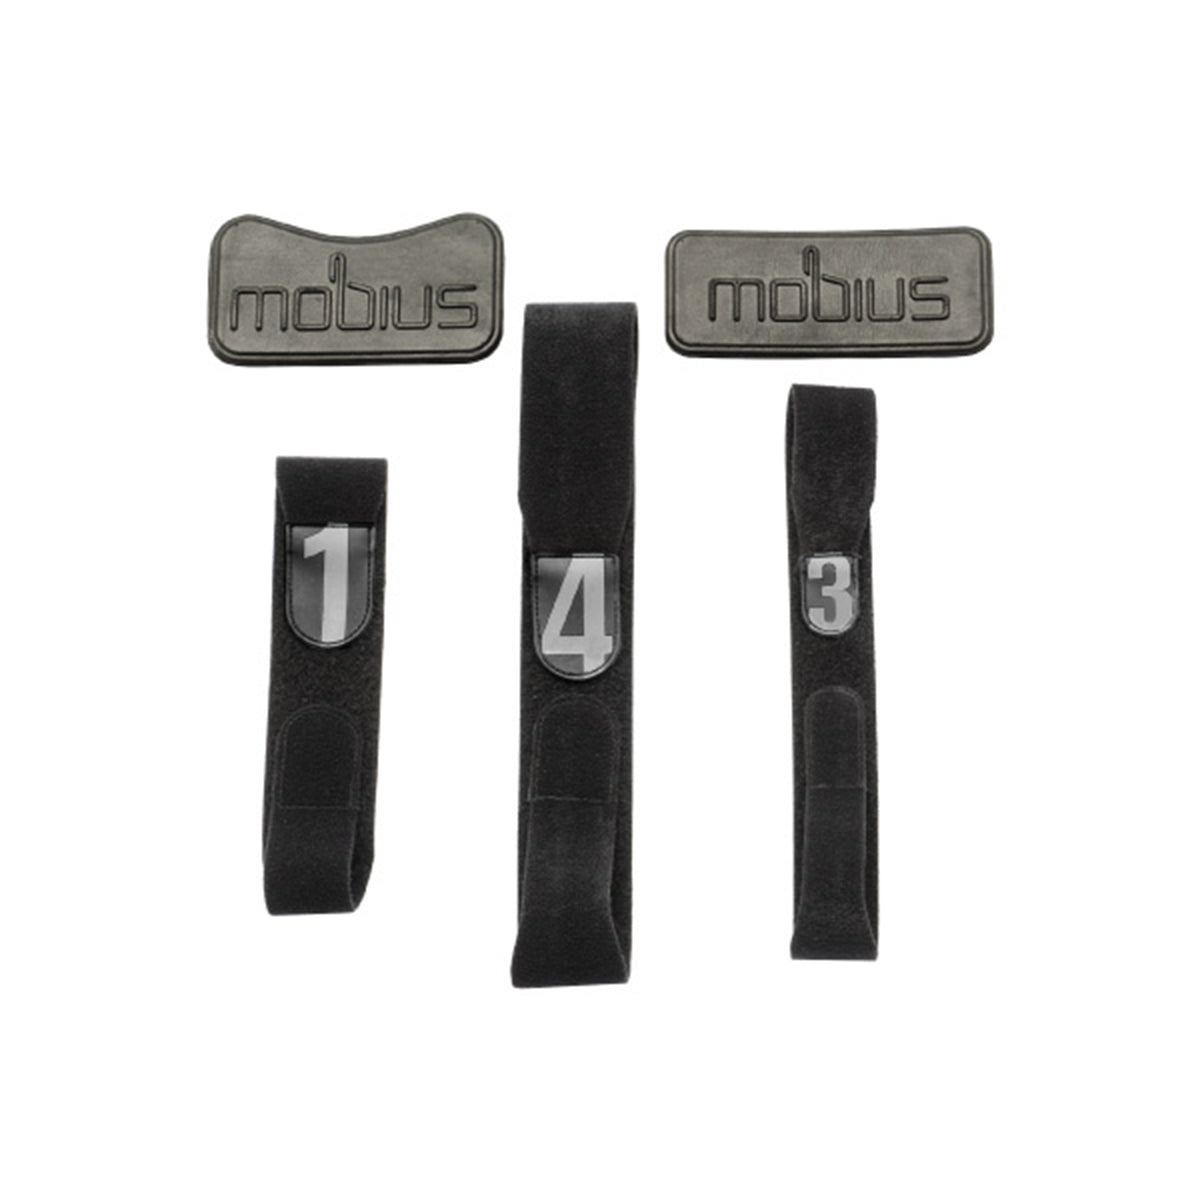 Mobius X8 Strap Replacement Kit Adult Off-Road Body Armor Accessories-2050202